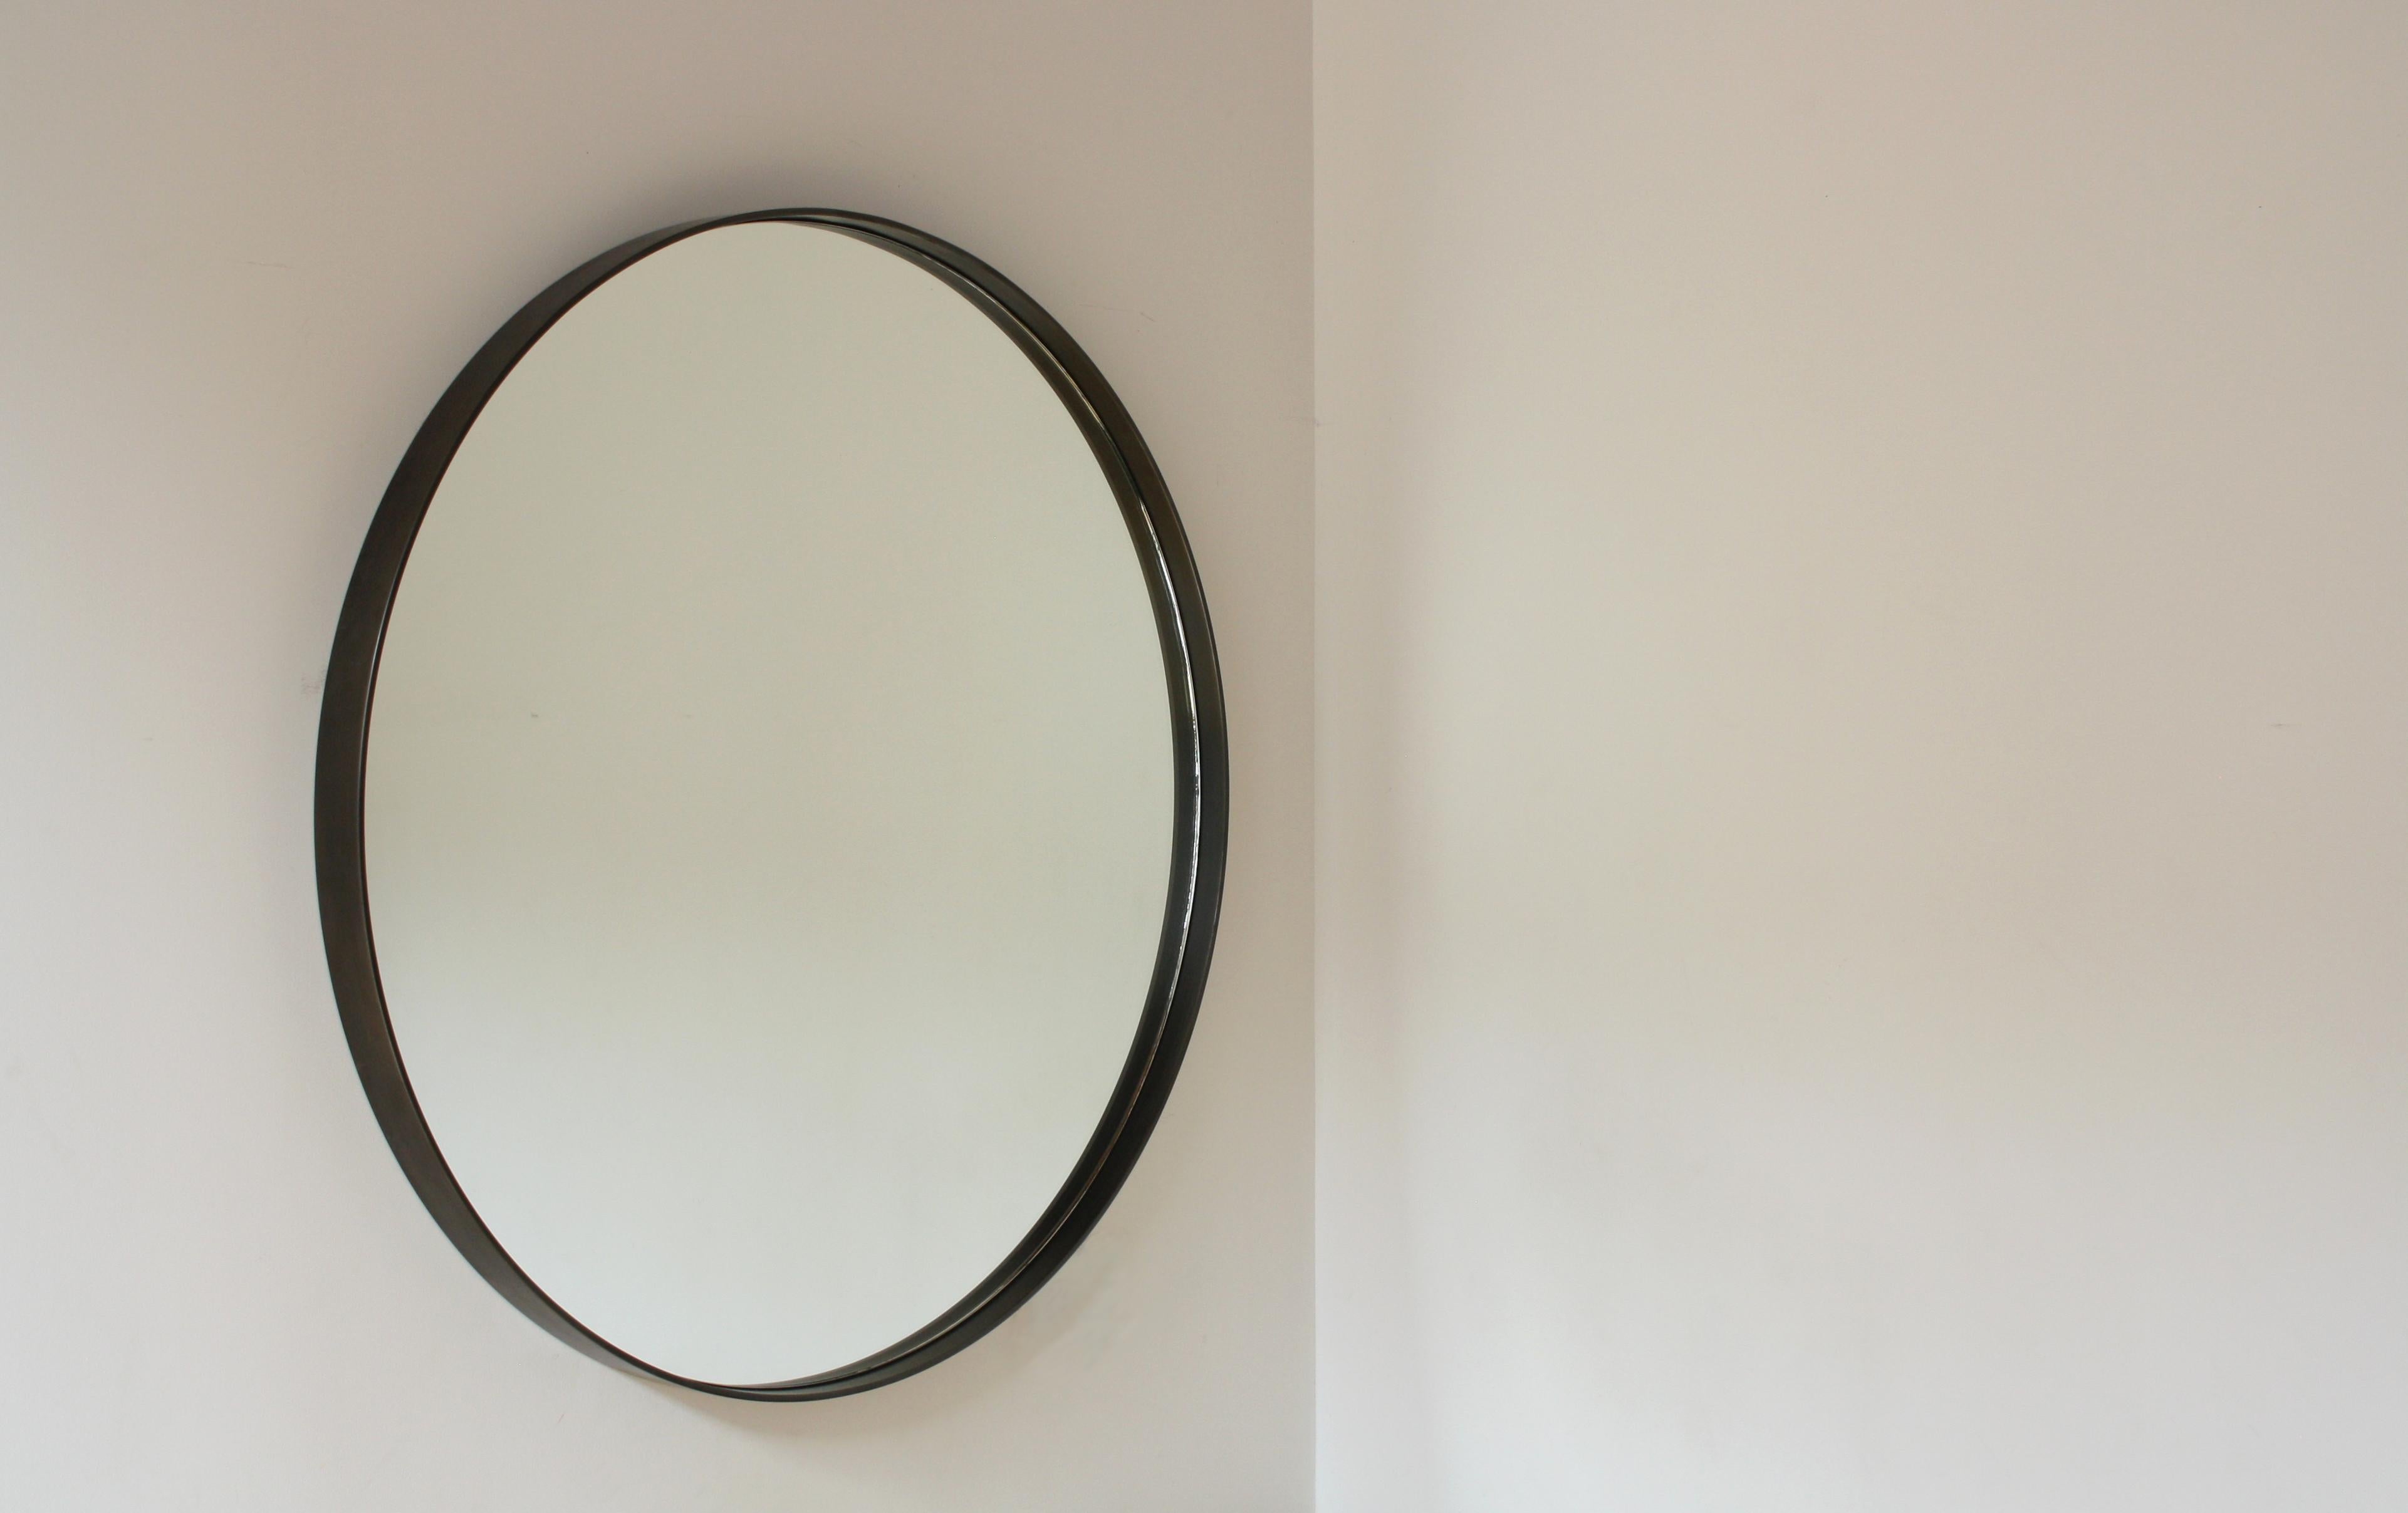 Handmade in Chicago by Laylo Studio, this customizable mirror features a clear, round mirror with polished edges centred inside a blackened steel frame. The circular metal frame is polished, gently brushed and darkened using a gun-blue patina that